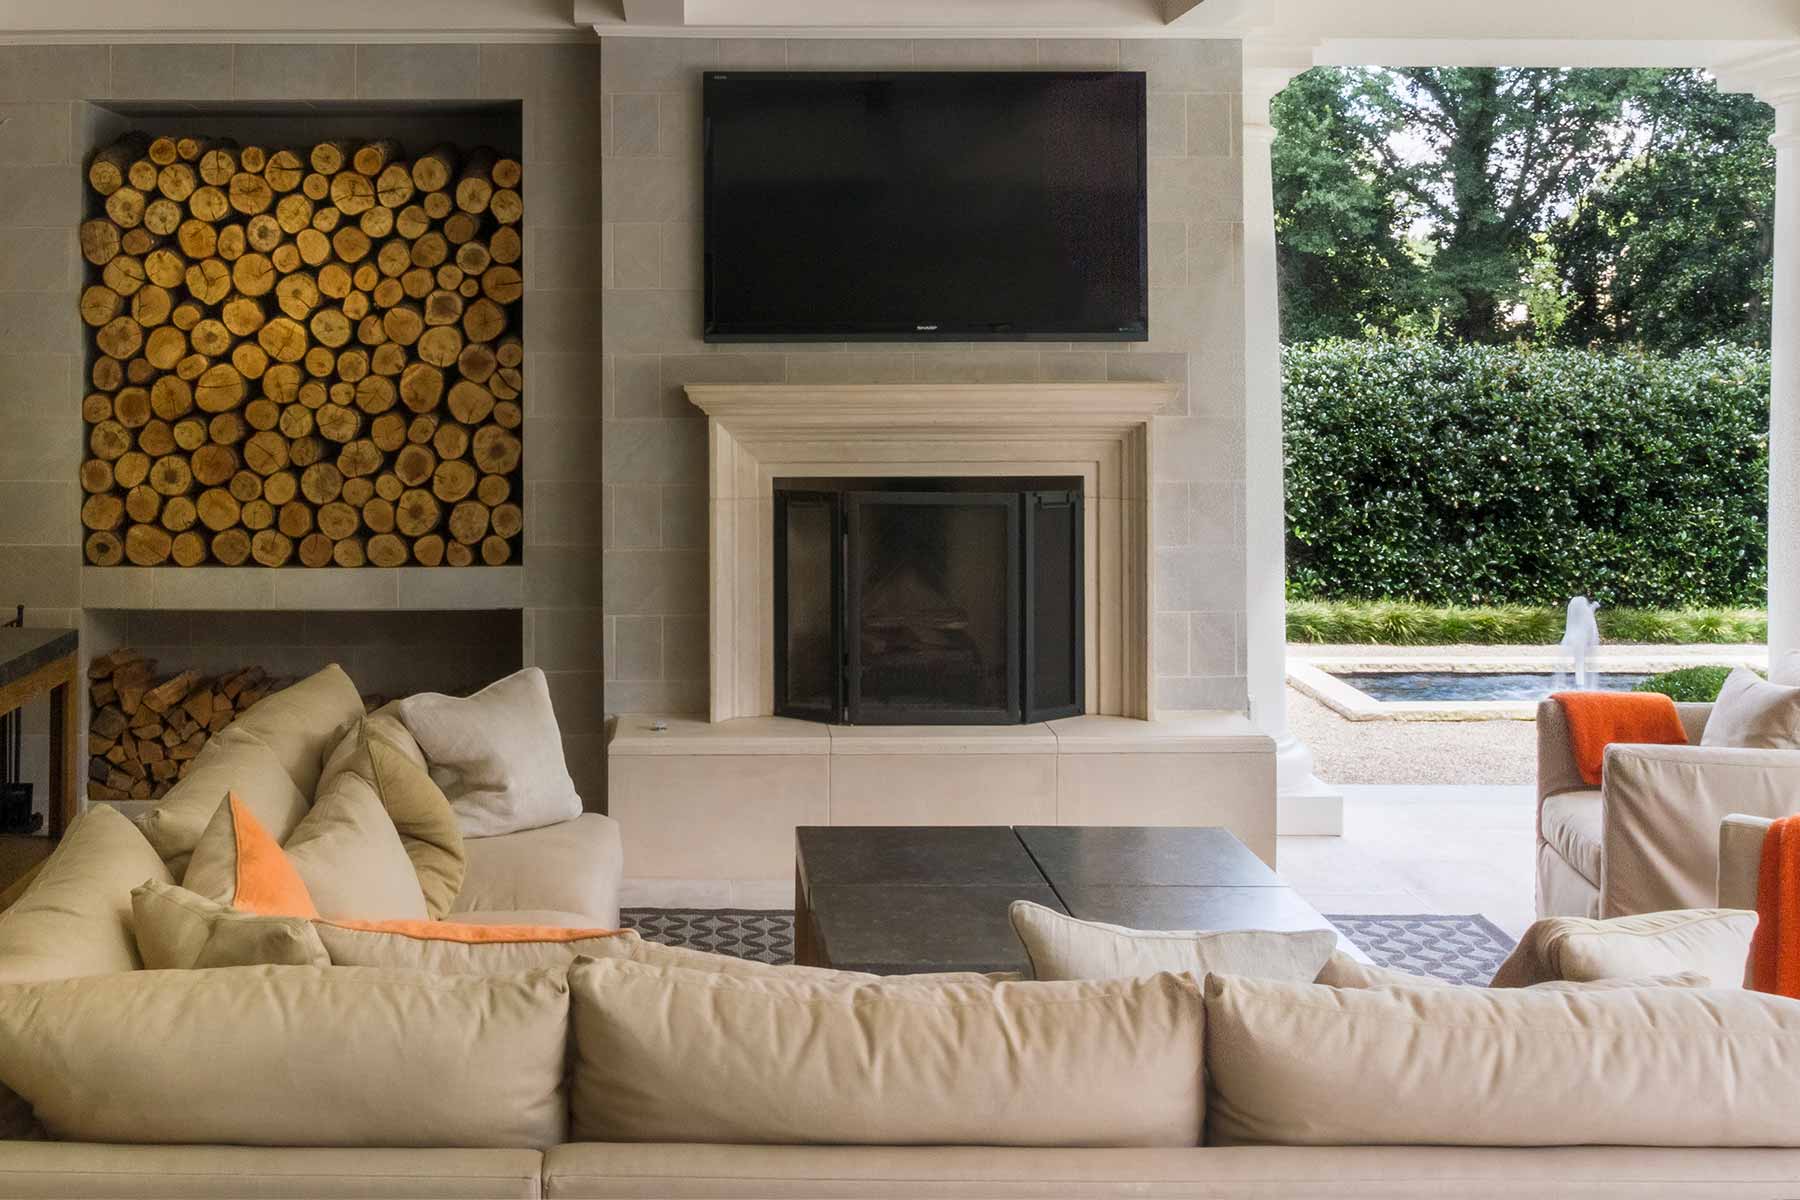 The tile fireplace mantle features finished harth tile which match the pool pavers